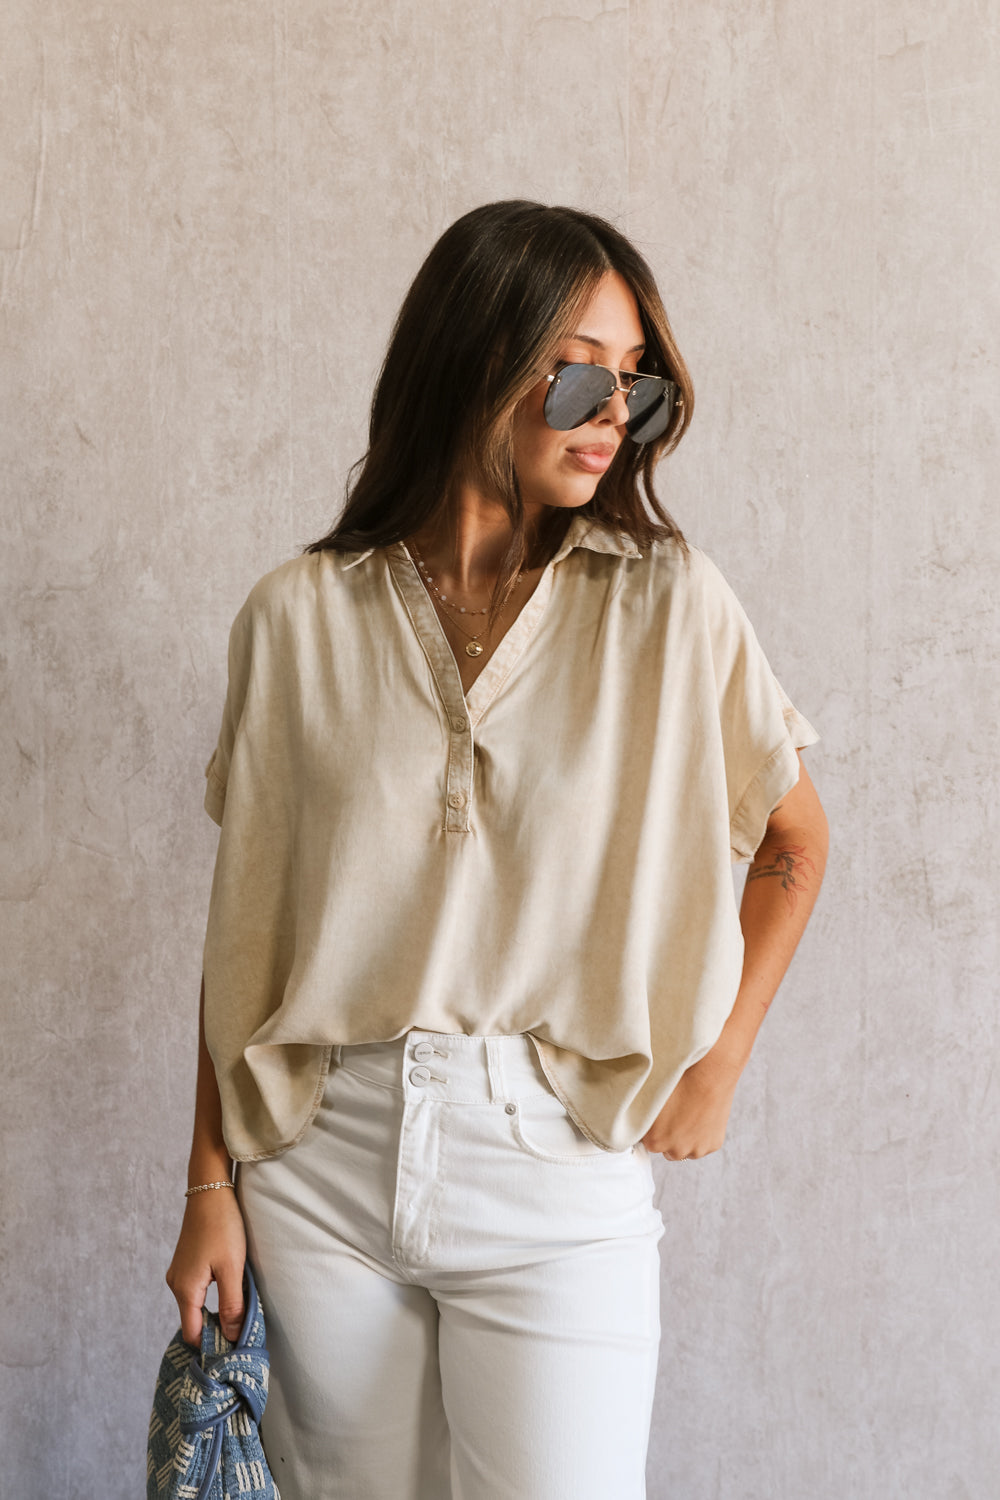 front view of female model wearing the Amalia Collared Short Sleeve Top in taupe, which has short sleeves and a collar neckline. Paired with white capris. Model is holding blue purse. Top is front tucked